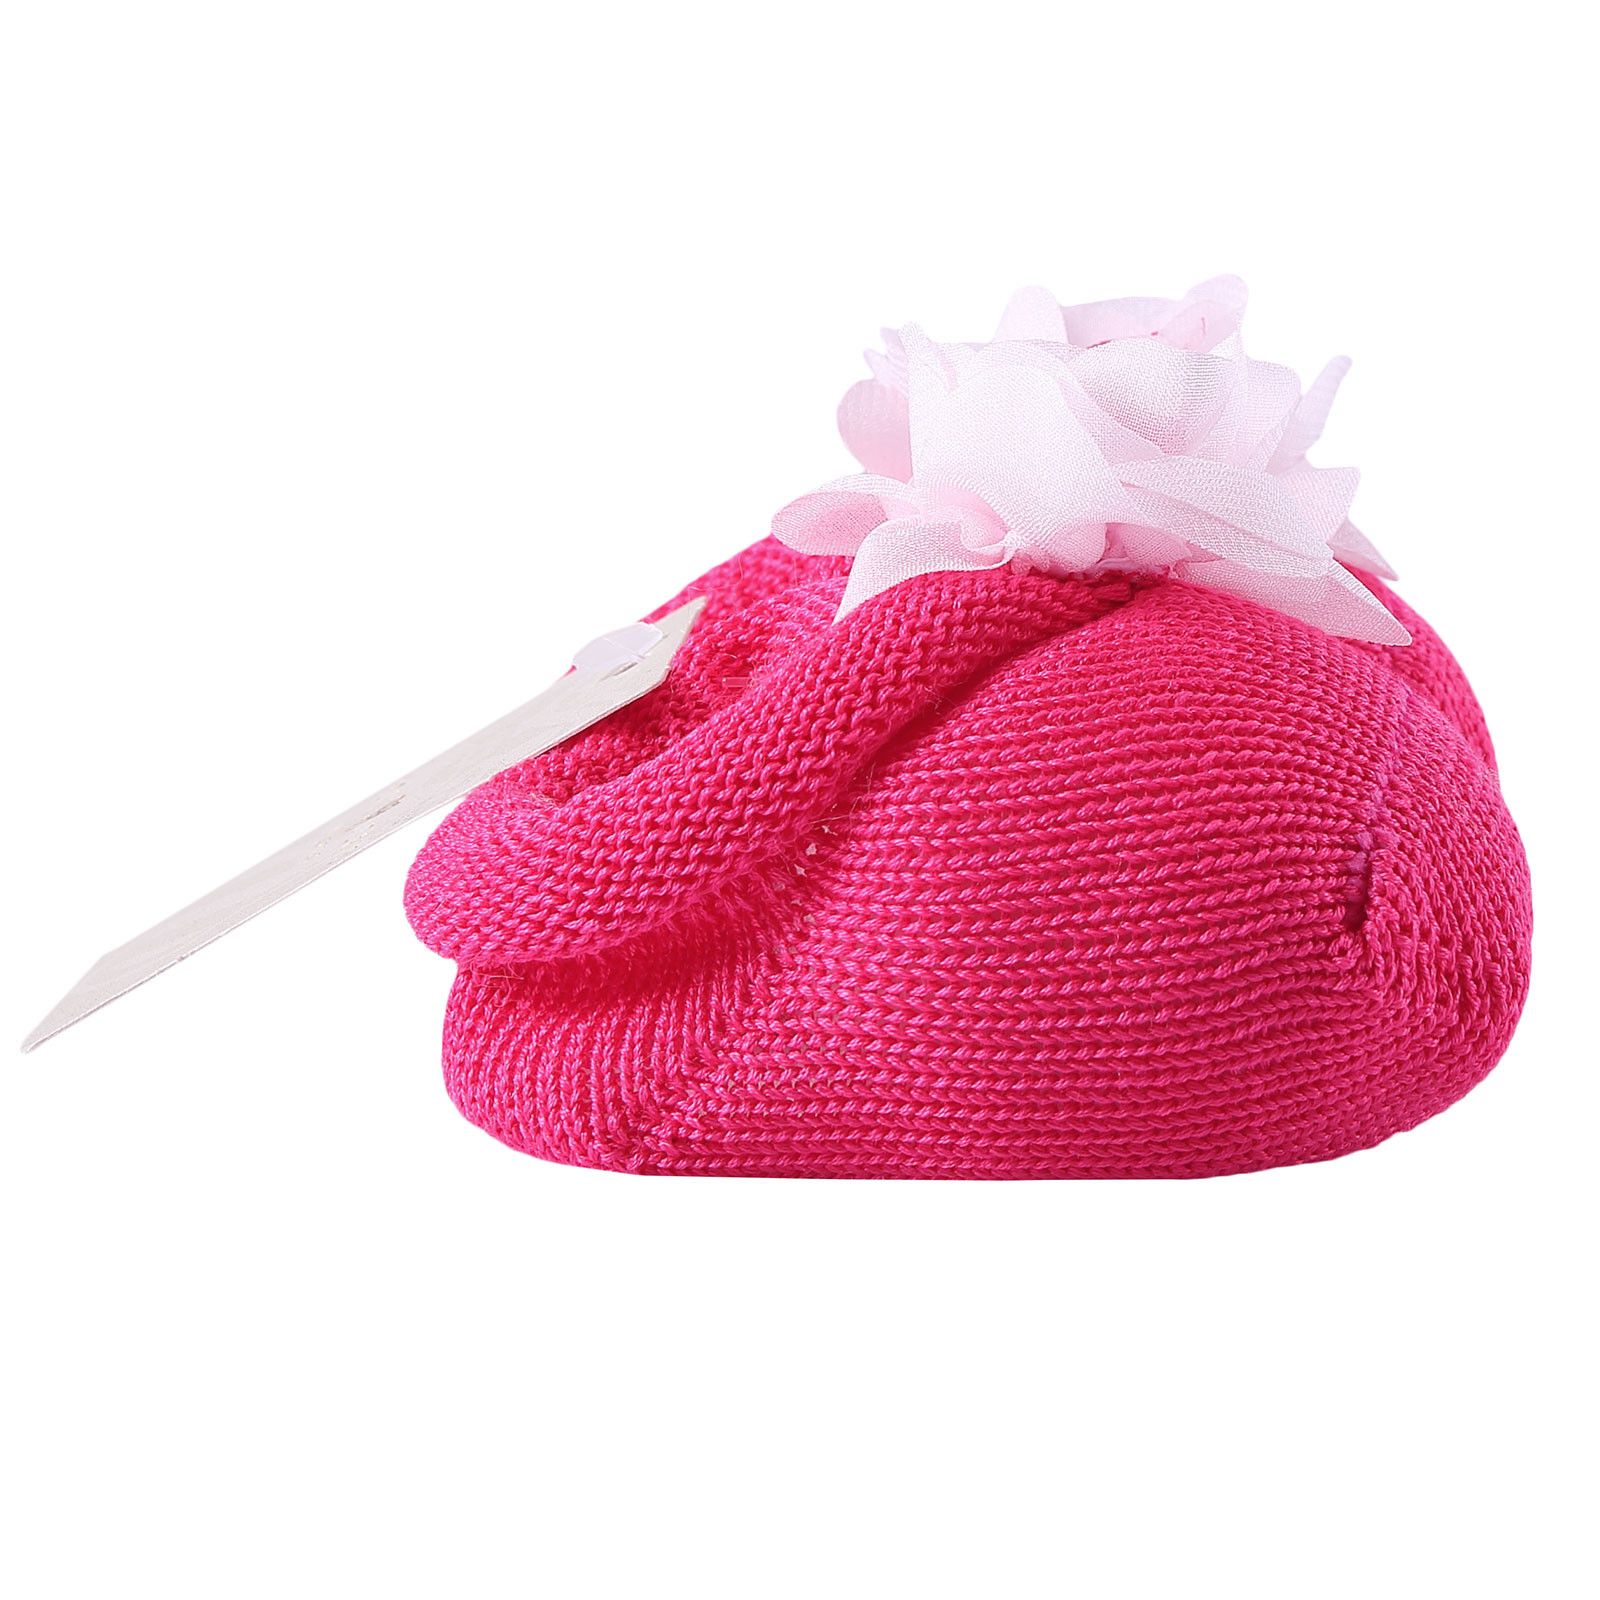 Baby Red Knitted Cotton Rose Shoes&Hair Band Gift Set - CÉMAROSE | Children's Fashion Store - 3